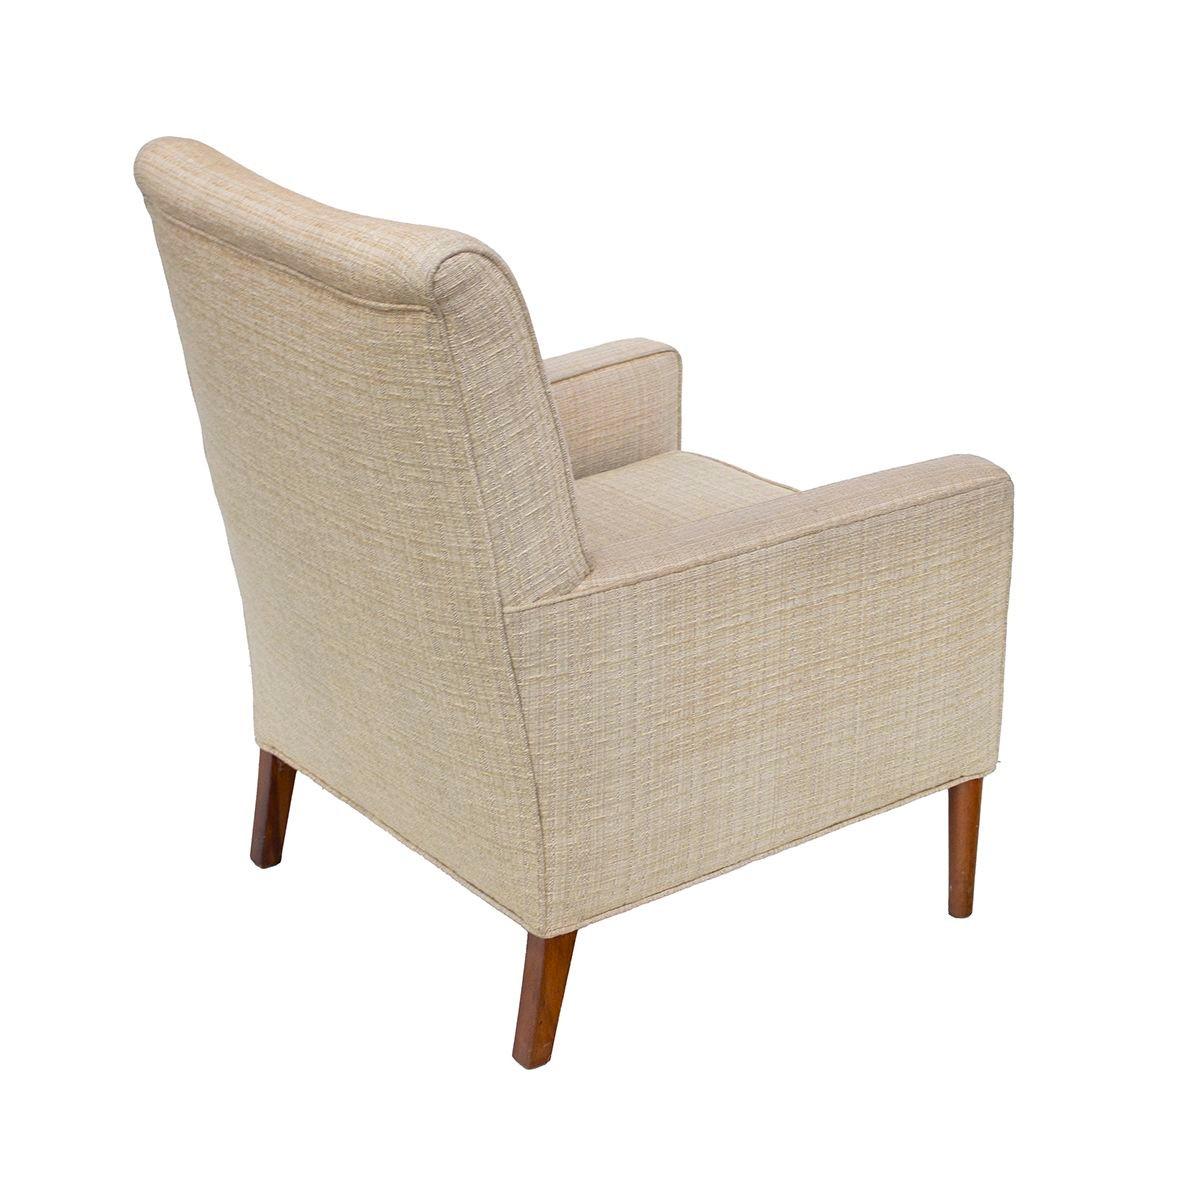 Midcentury Armchair with nice Moderate Scale In Fair Condition For Sale In Grand Rapids, MI